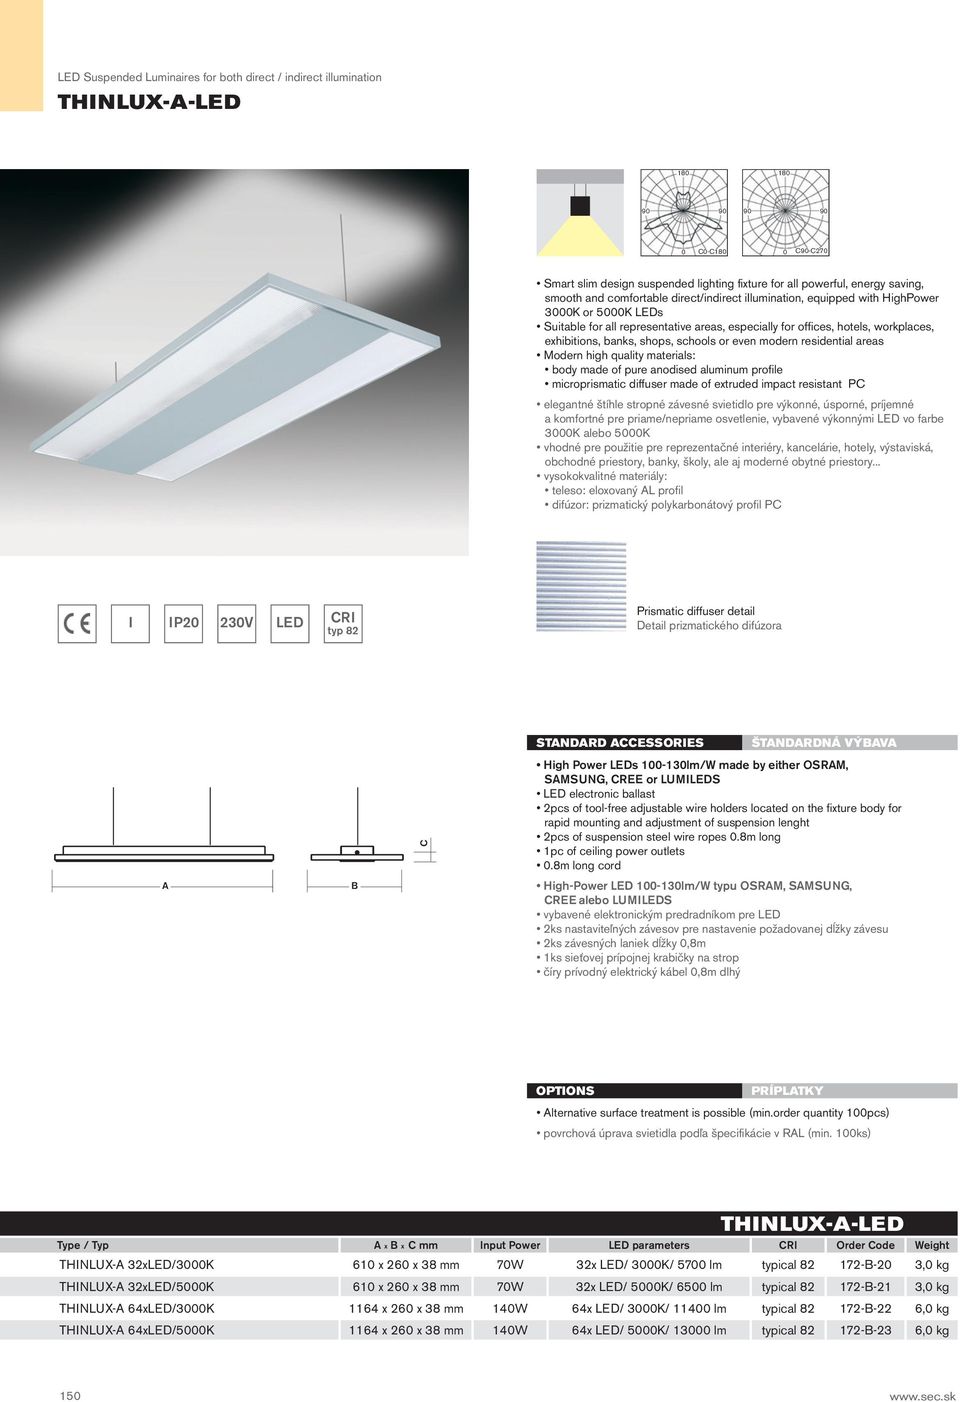 schools or even modern residential areas Modern high quality materials: body made of pure anodised aluminum profile microprismatic diffuser made of extruded impact resistant PC elegantné štíhle